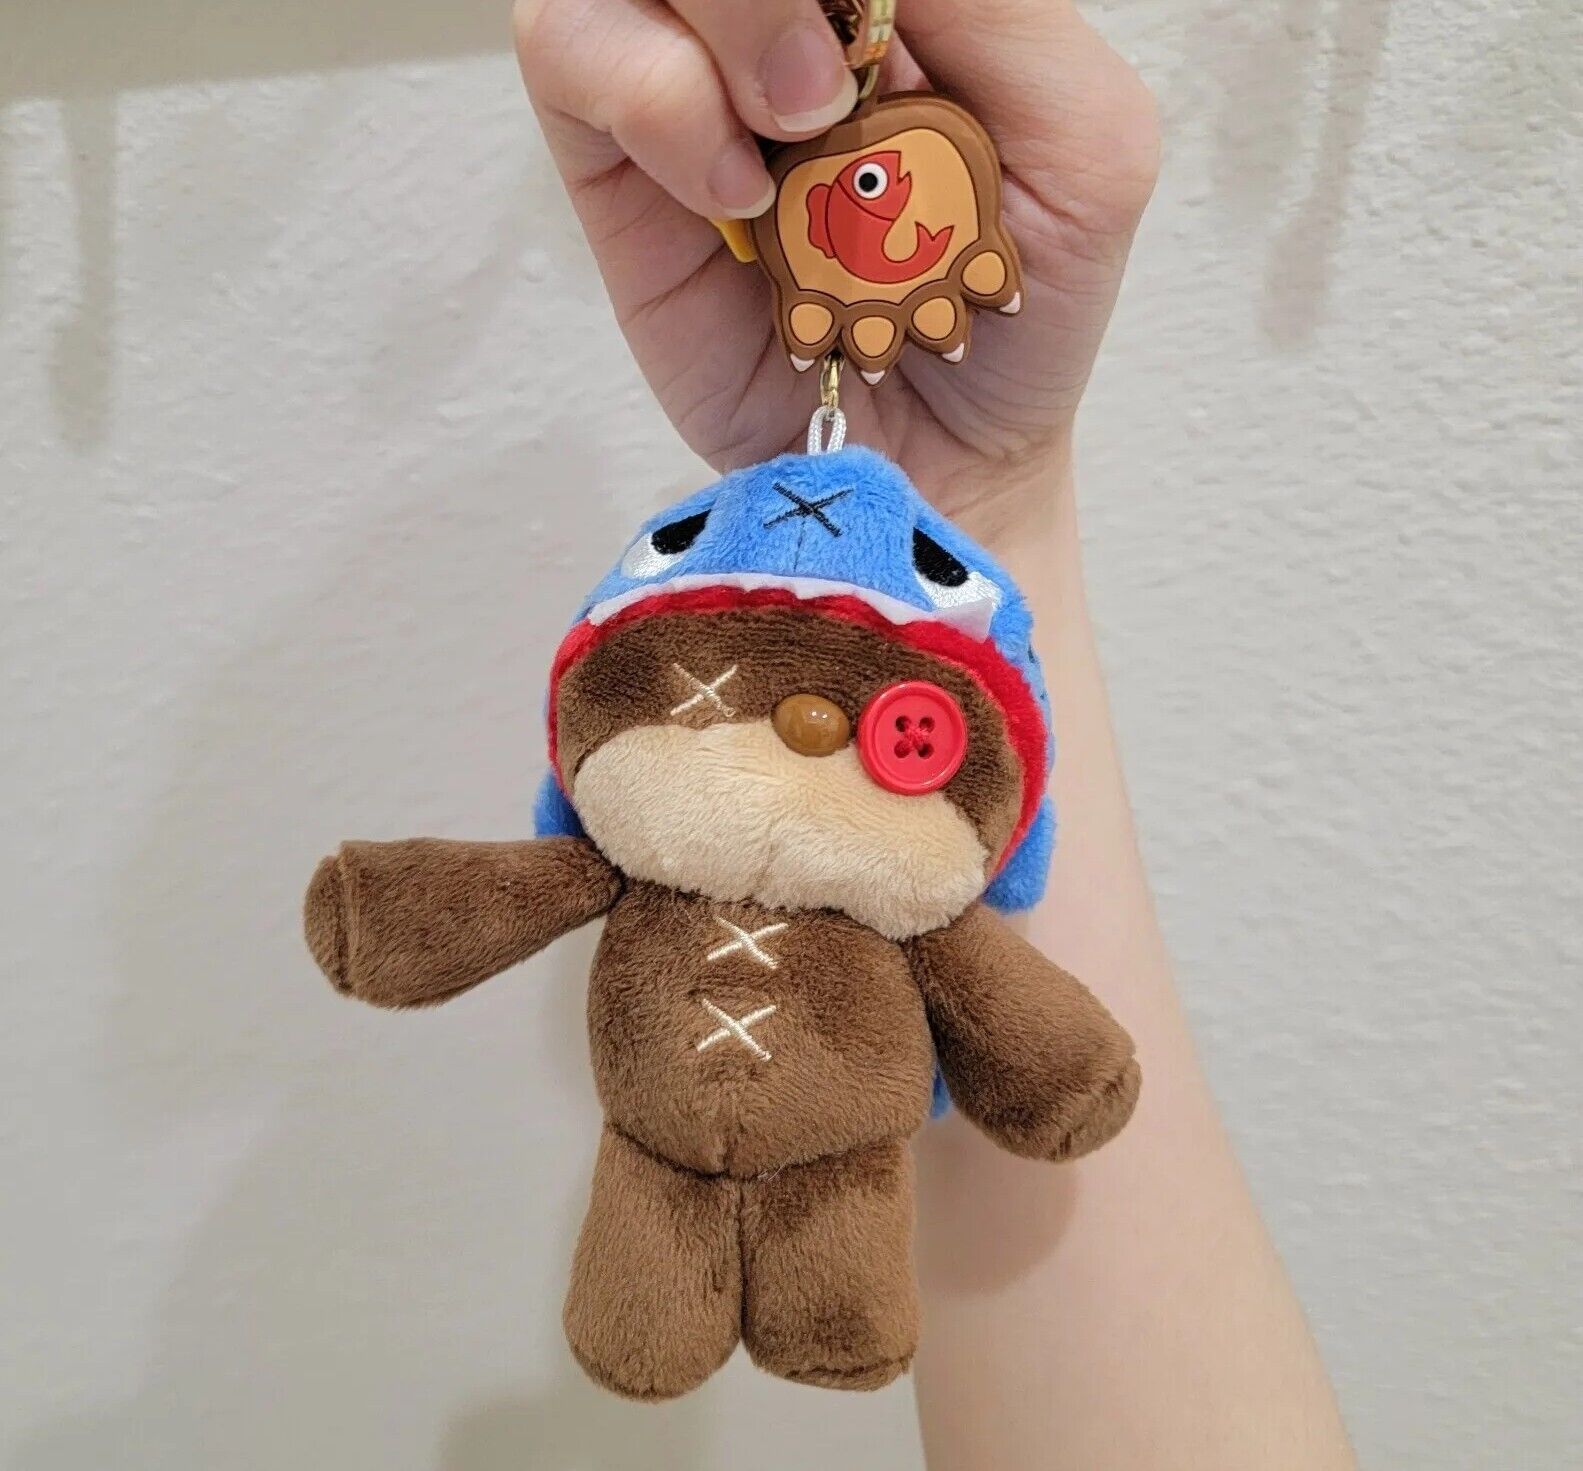 Official Retired Fizz tibbers mini plush keychain league of legends